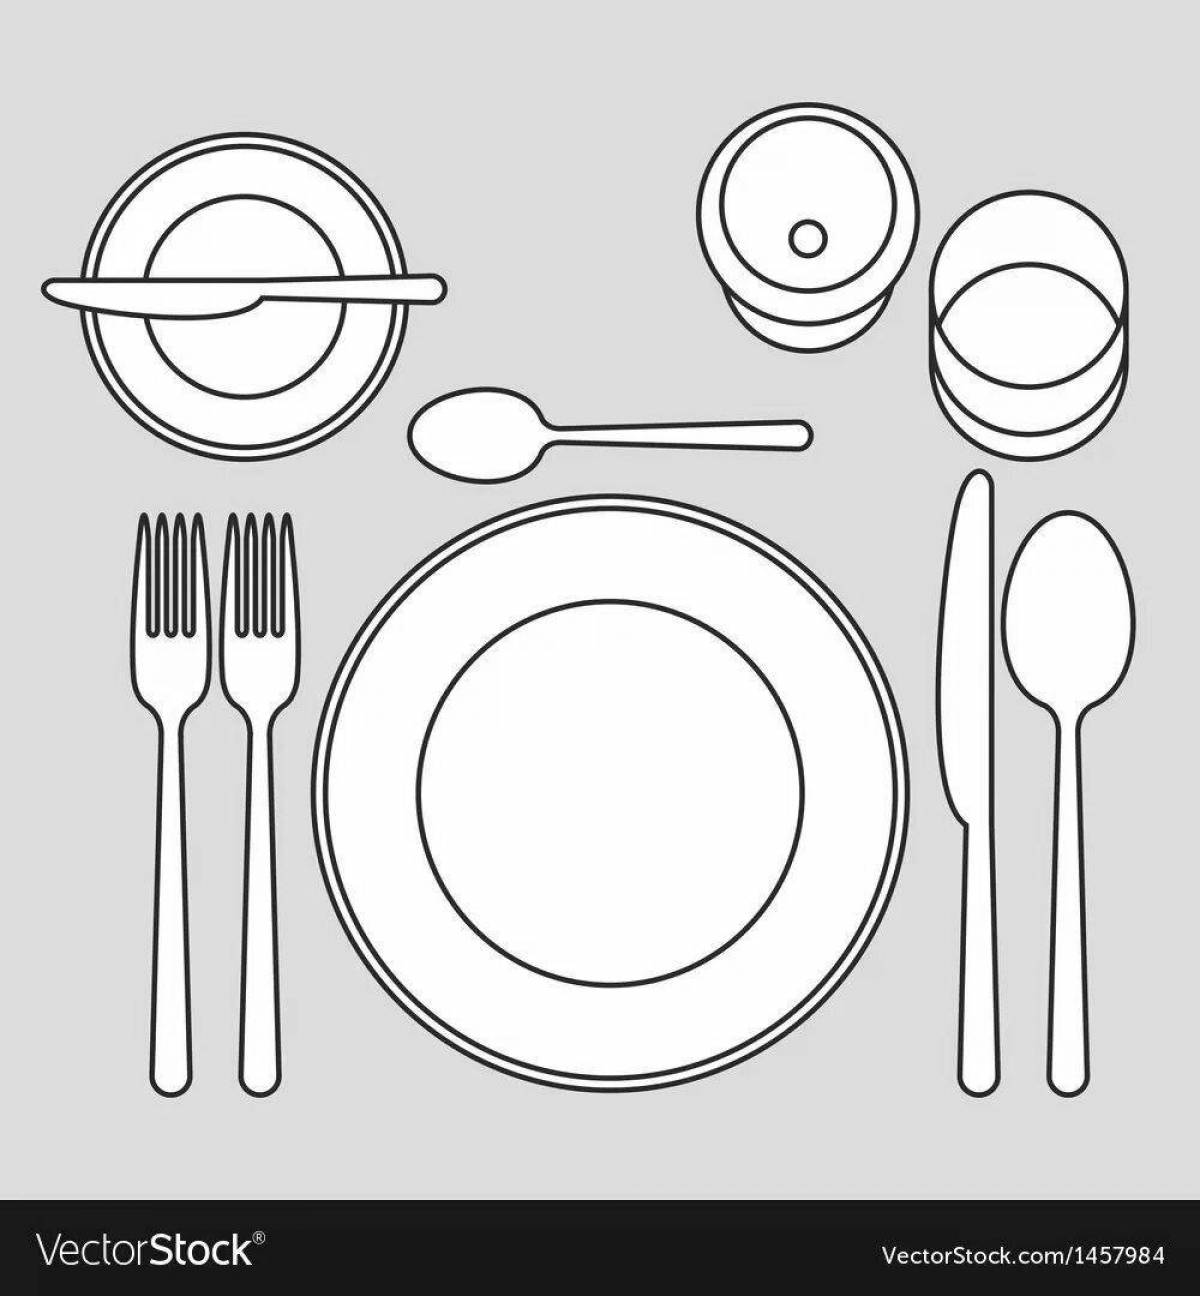 Amazing table setting coloring book for kids